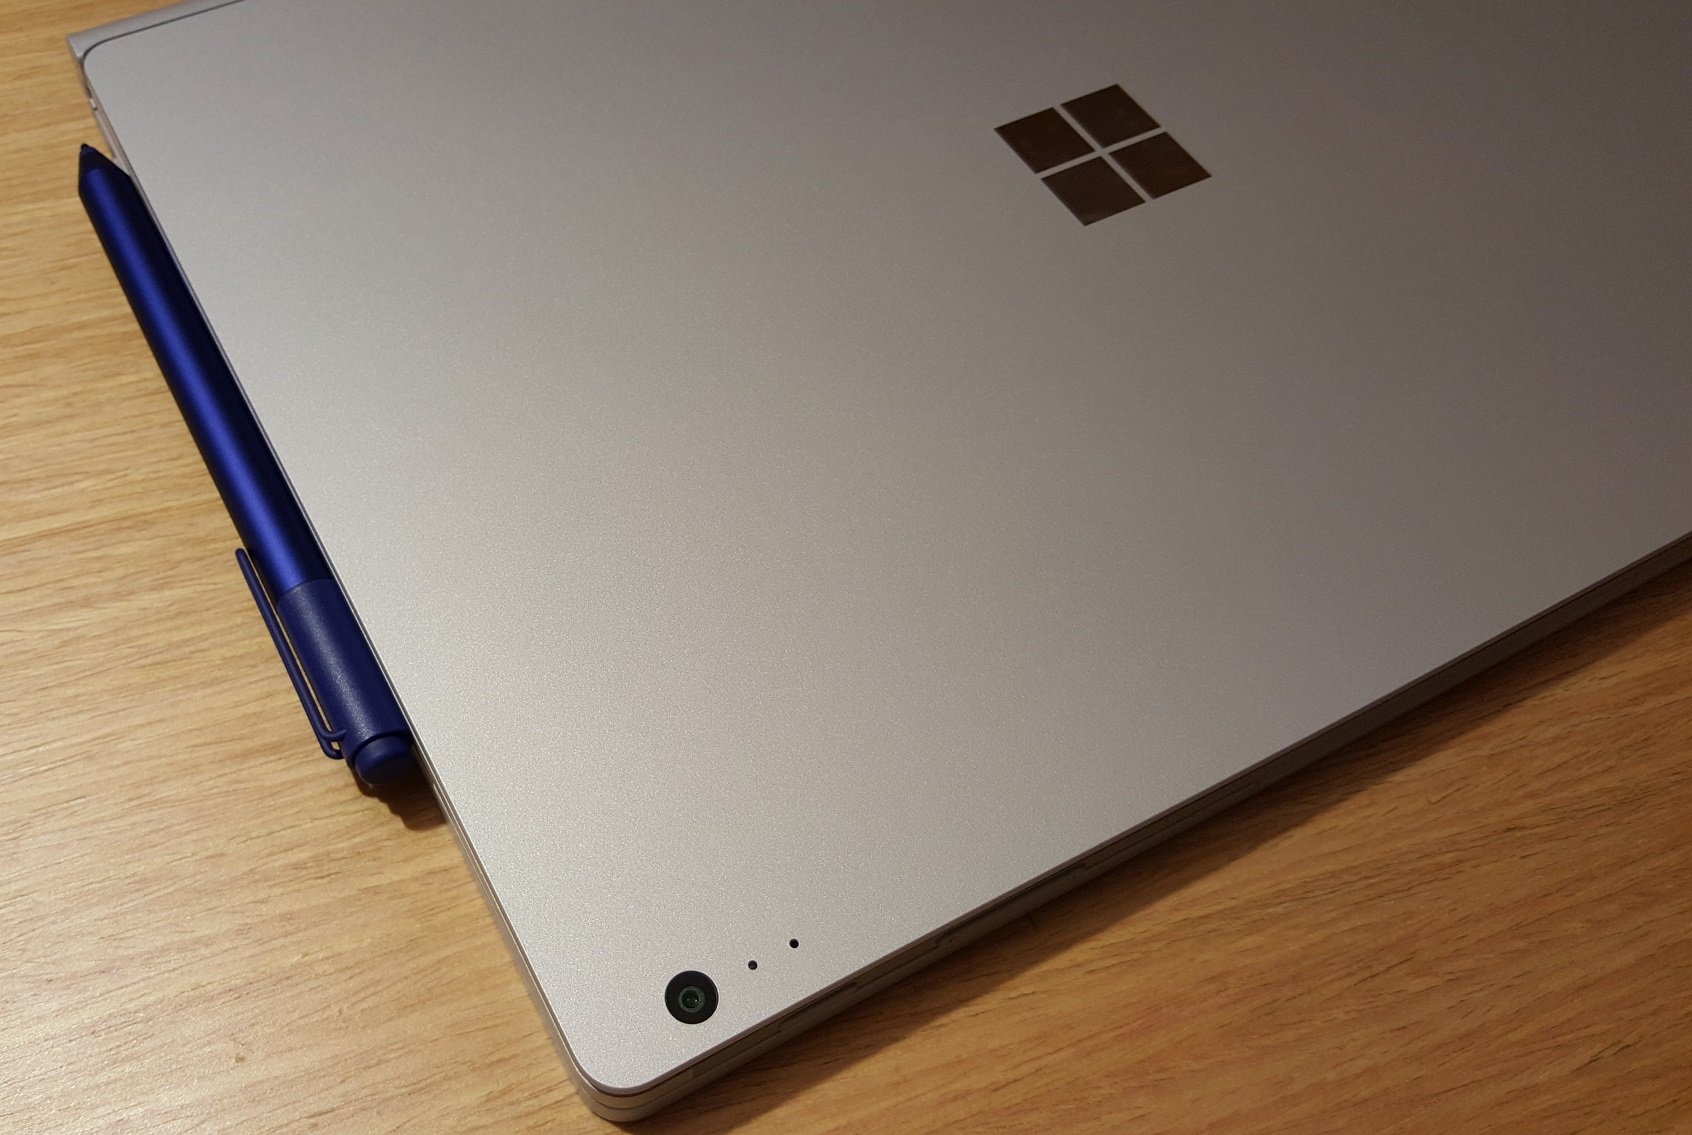 Surface Pro 5 doesn't exist (until it does)